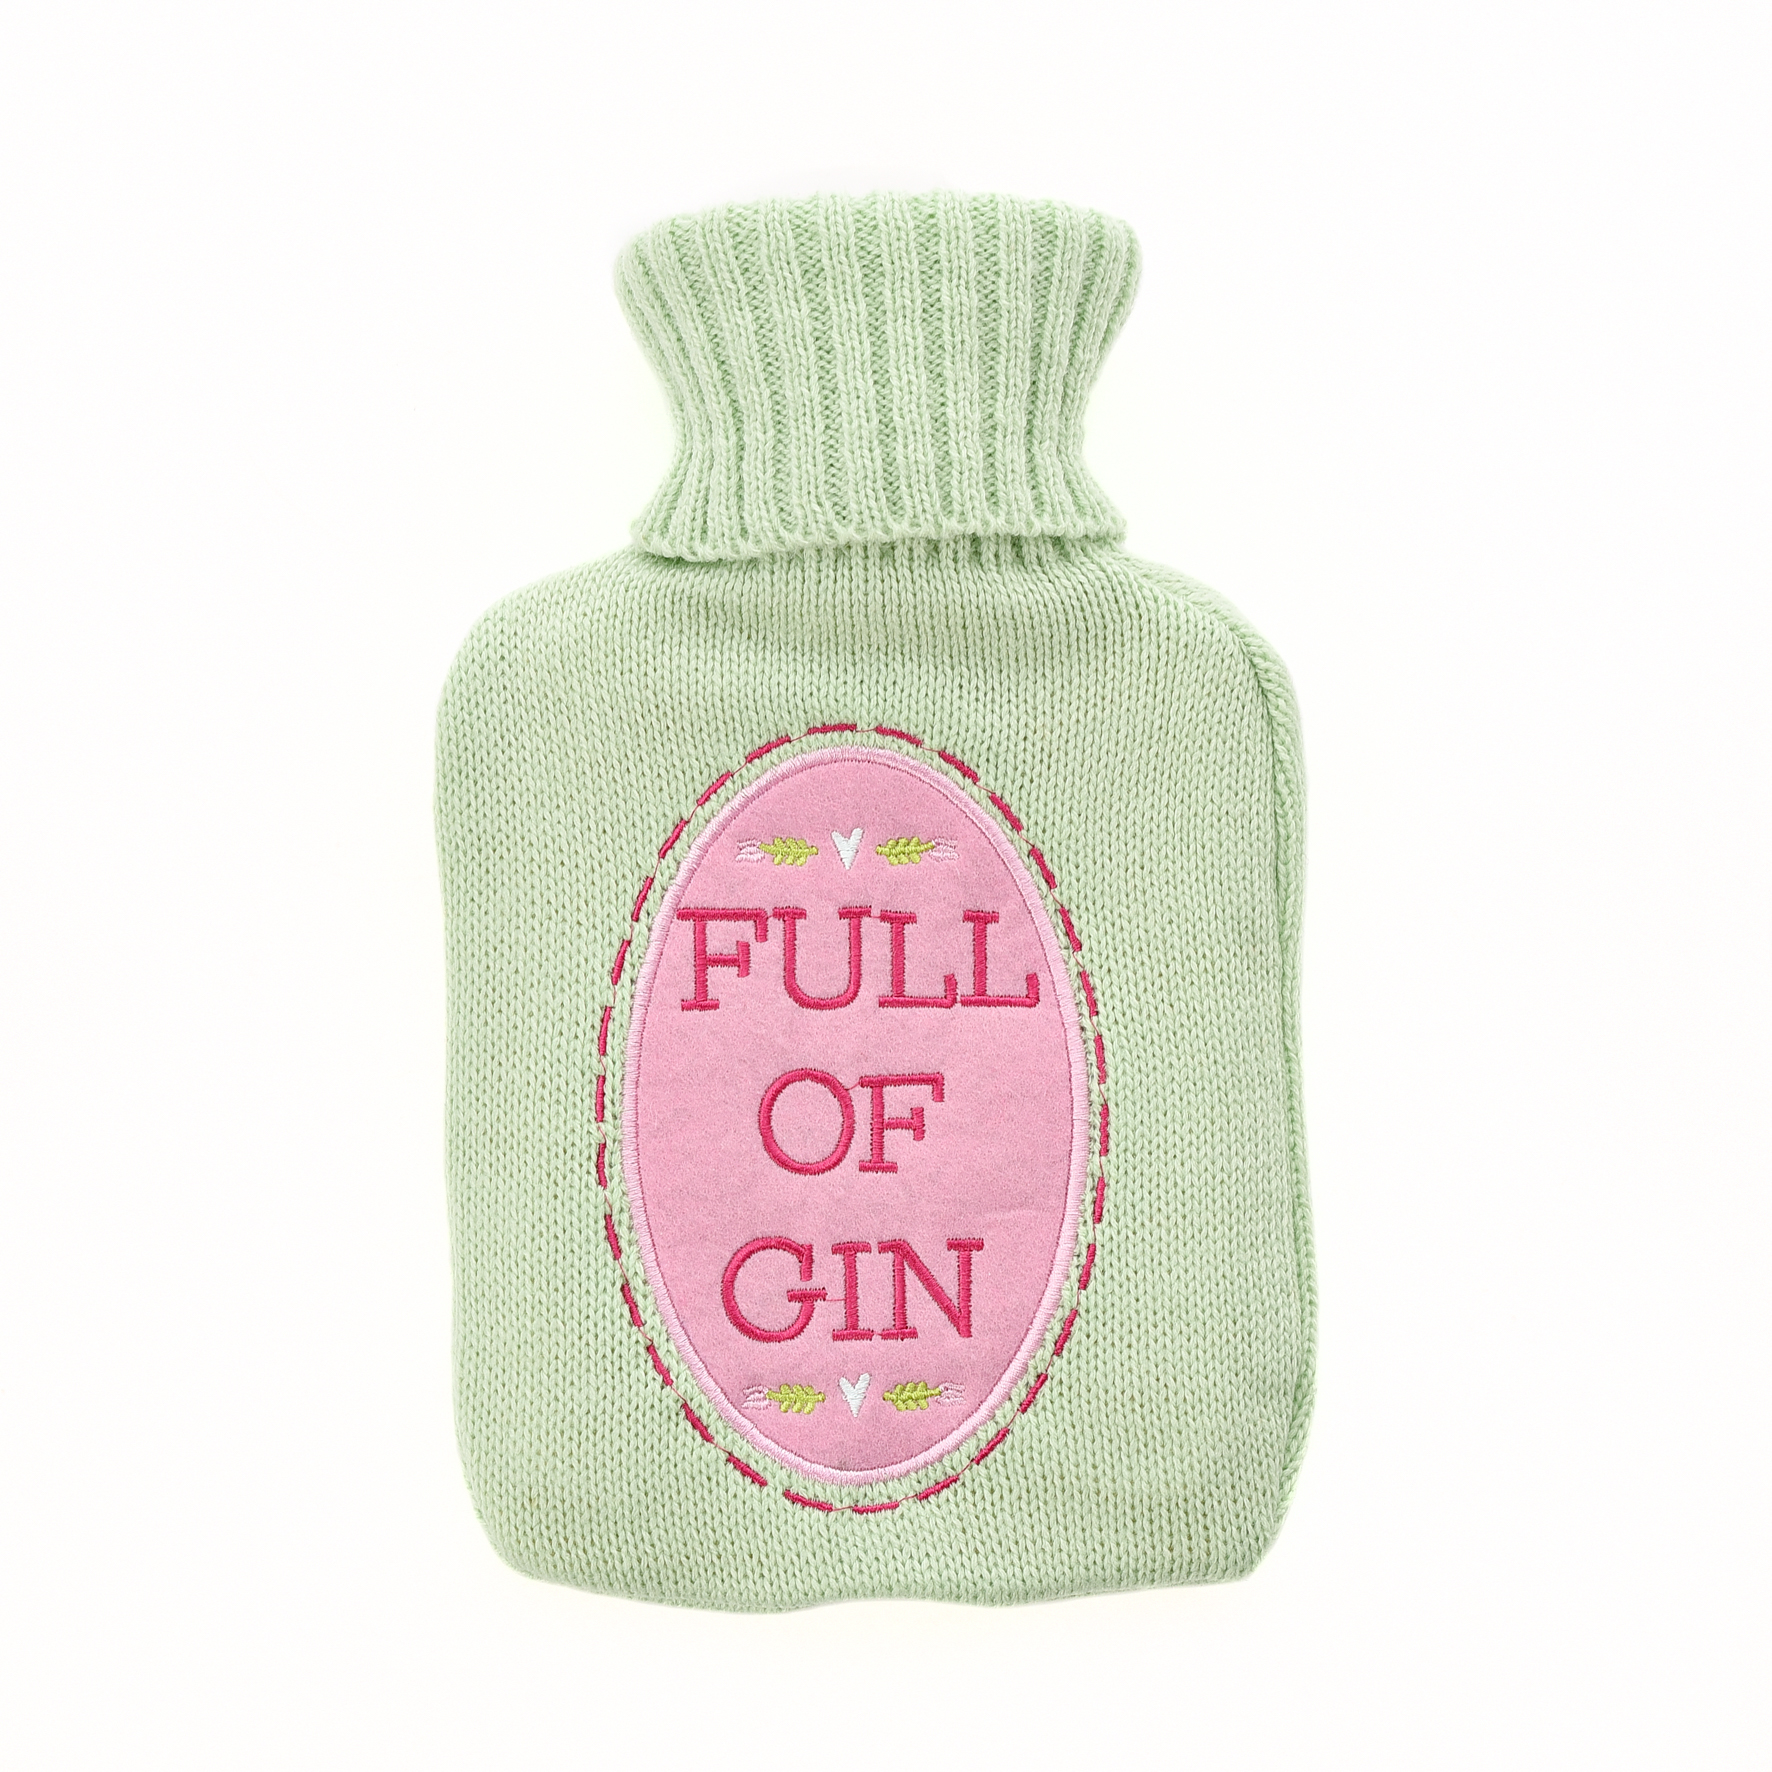 &Quirky Full Of Gin Hot Water Bottle